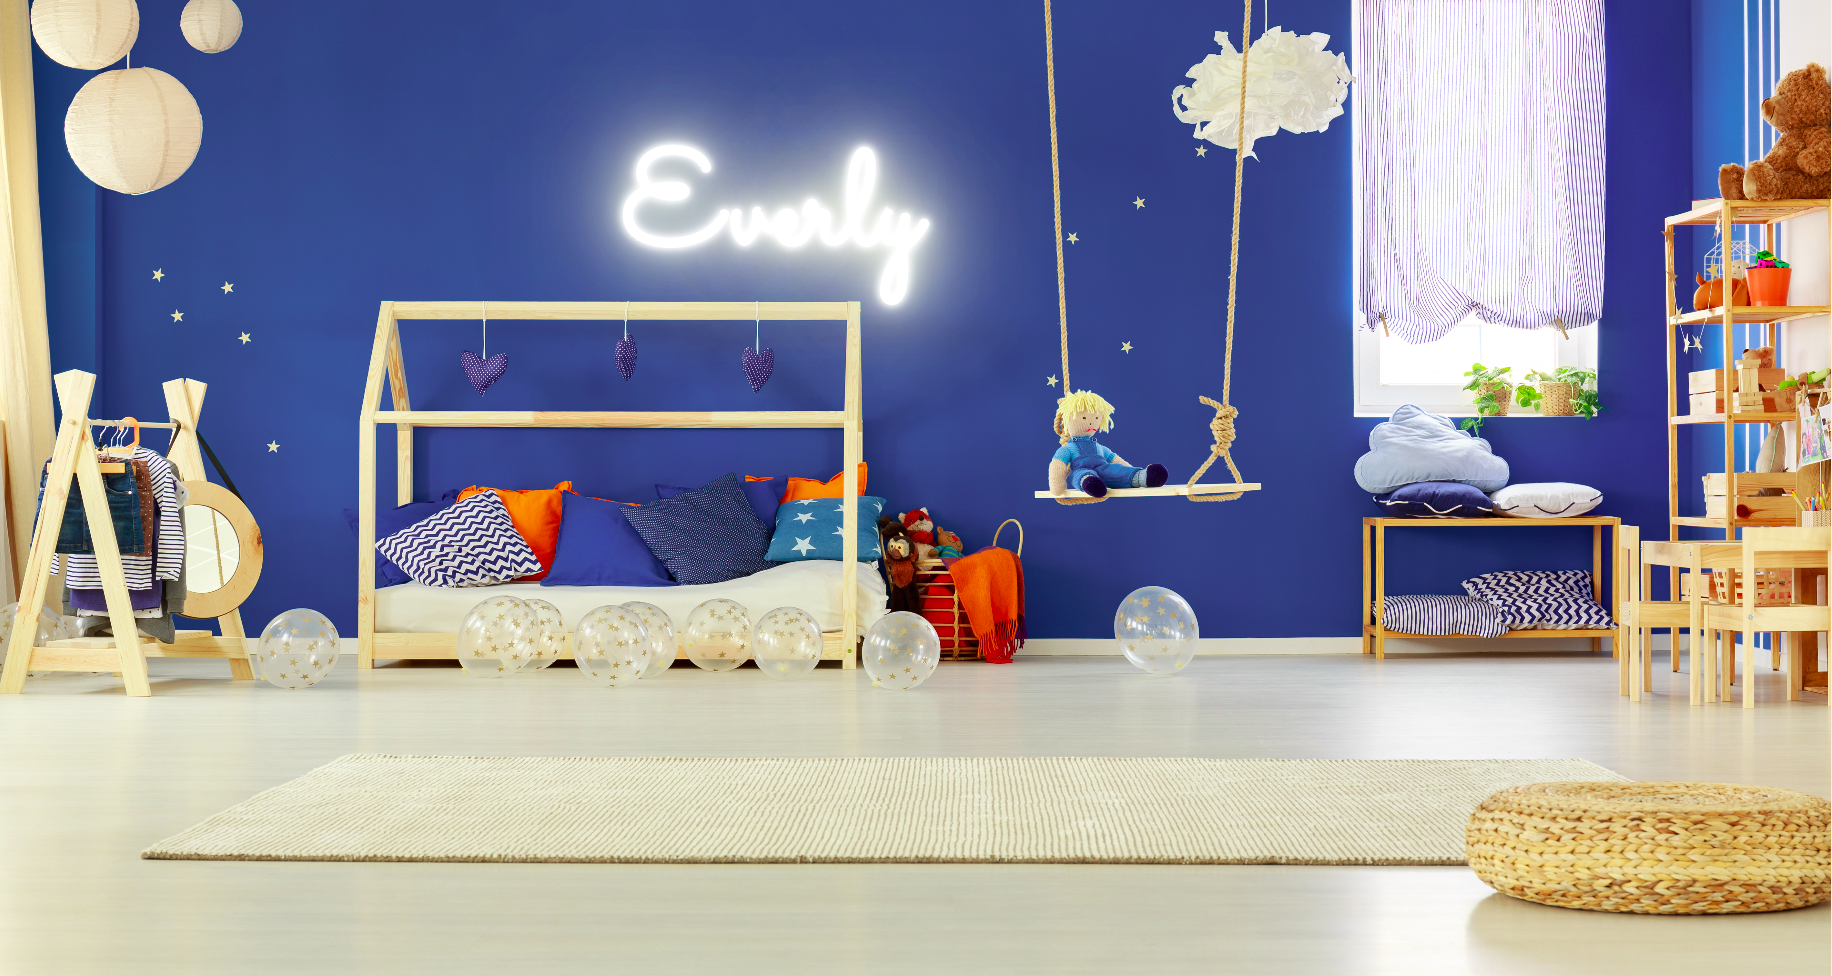 "Everly" Baby Name LED Neon Sign